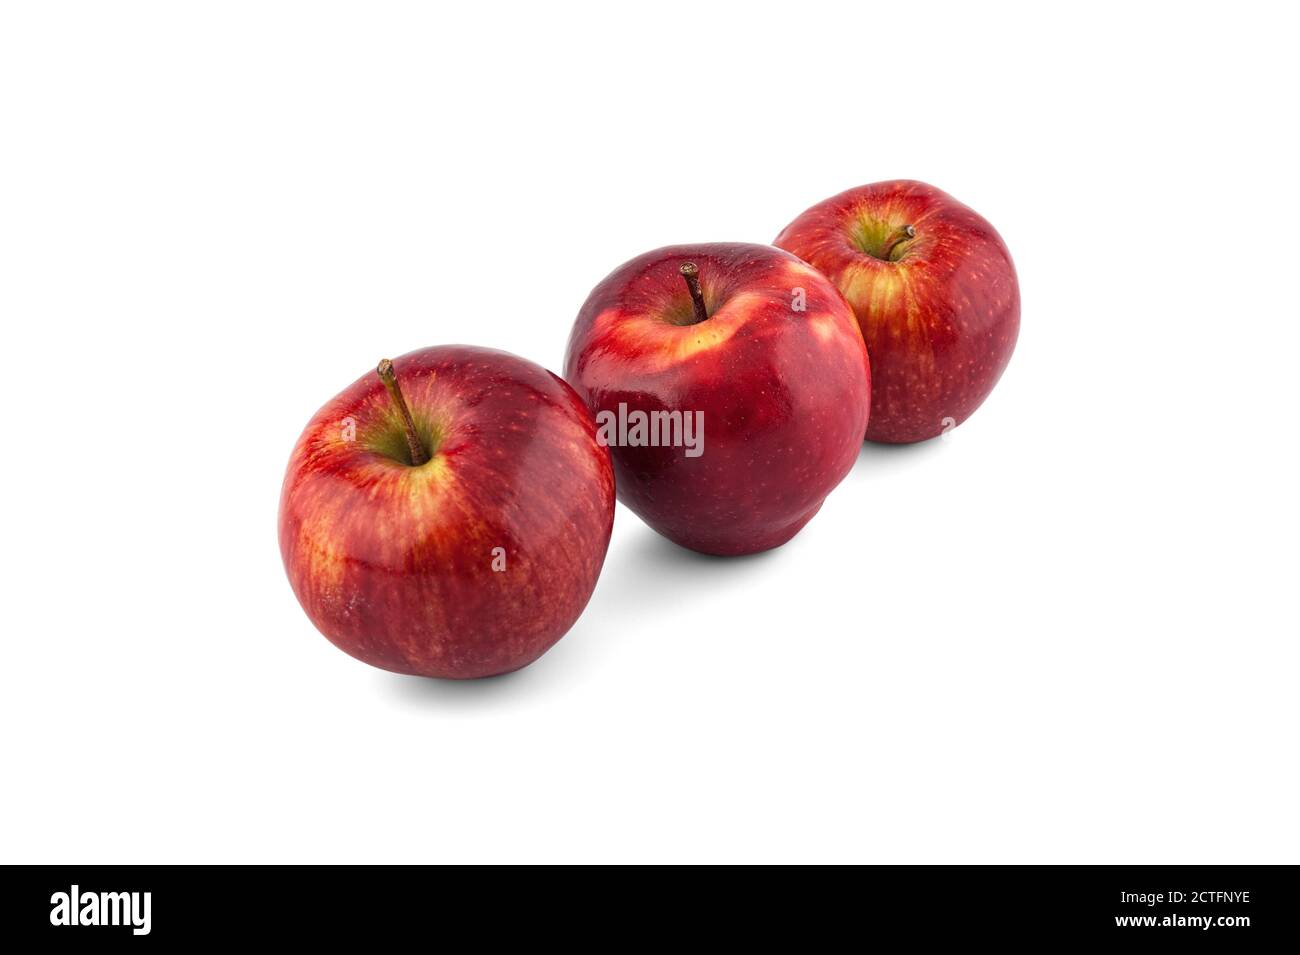 Group of three whole green apple isolated on white background. Stock Photo